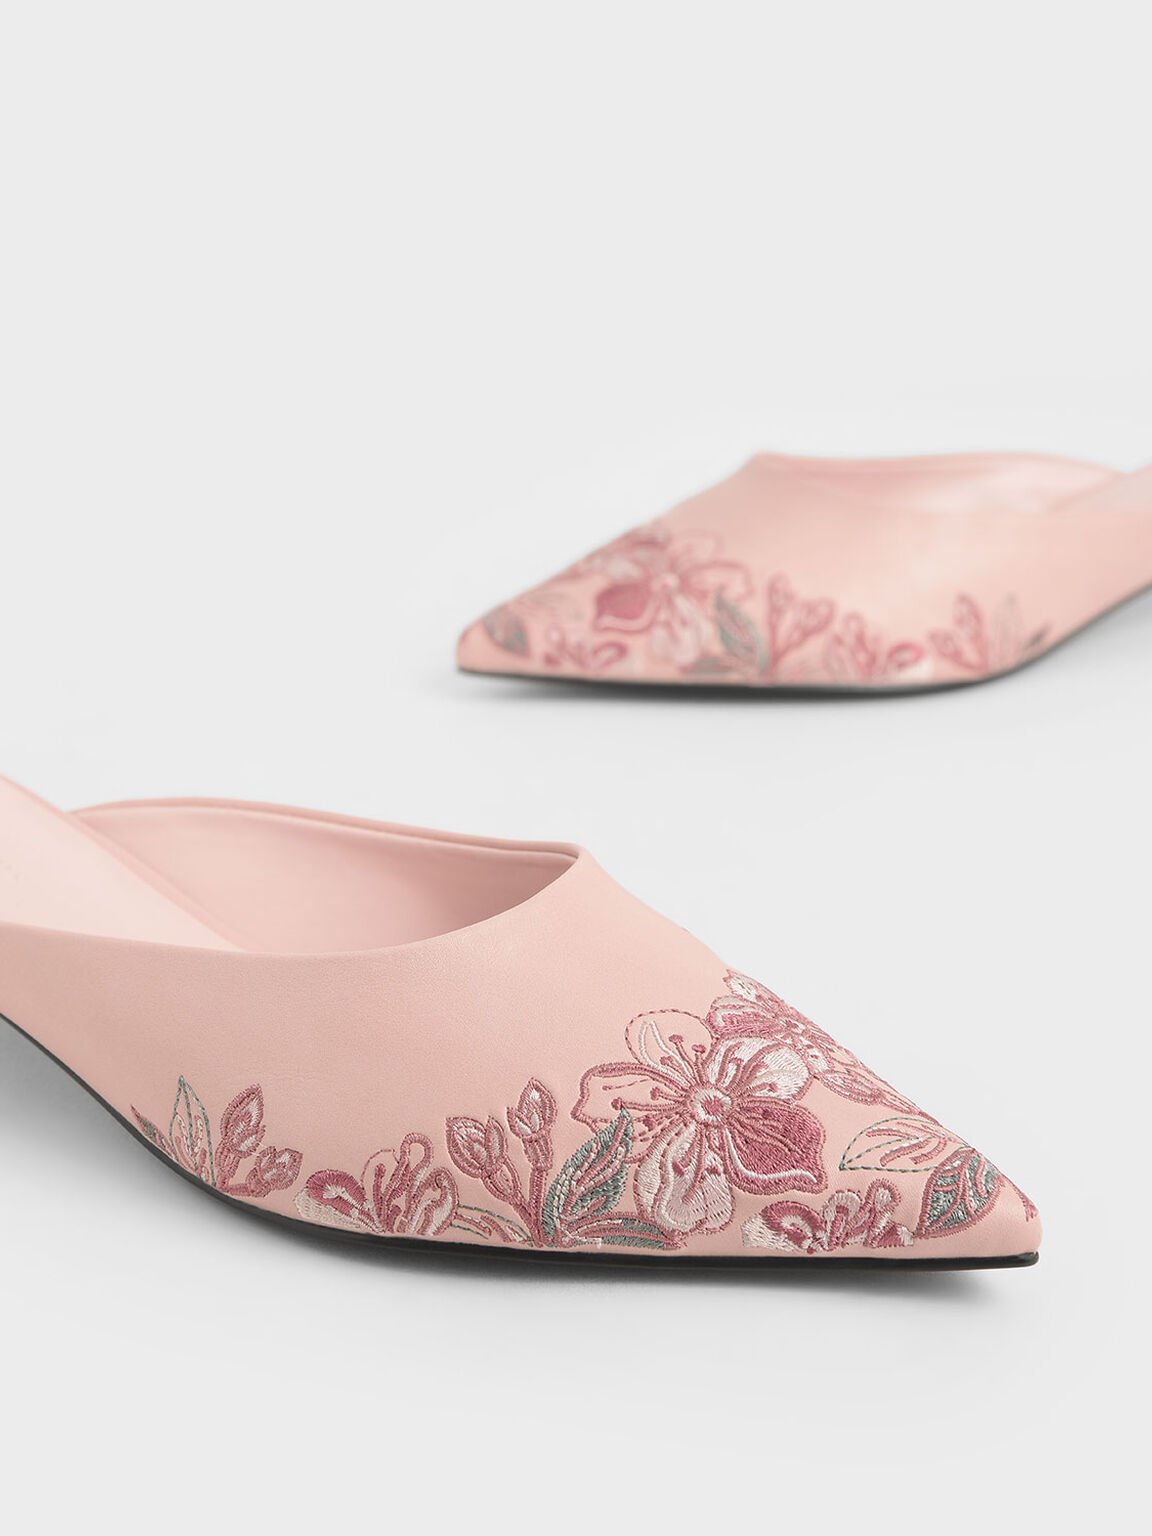 Embroidered Floral Mules, Pink, hi-res